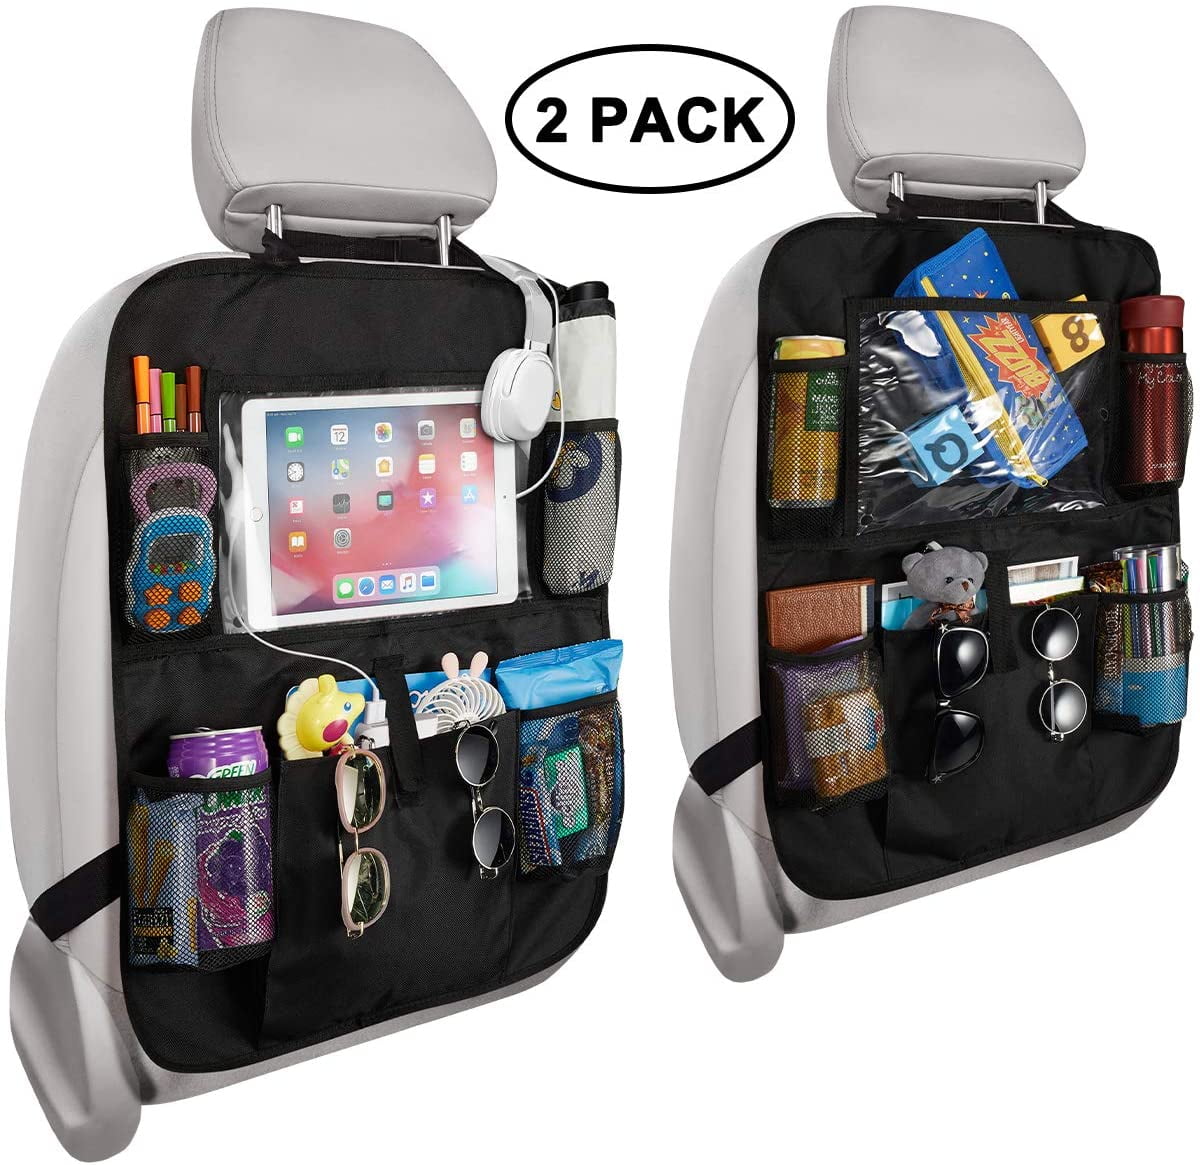 Sushiyi Gear Car Back Seat Organizer with Large Storage Bag Eco Friendly Materials Large Storage Space Great for Road Trips 5559021109 8 Pocket Include 2 Large,2 Small and 4 Net Pockets 